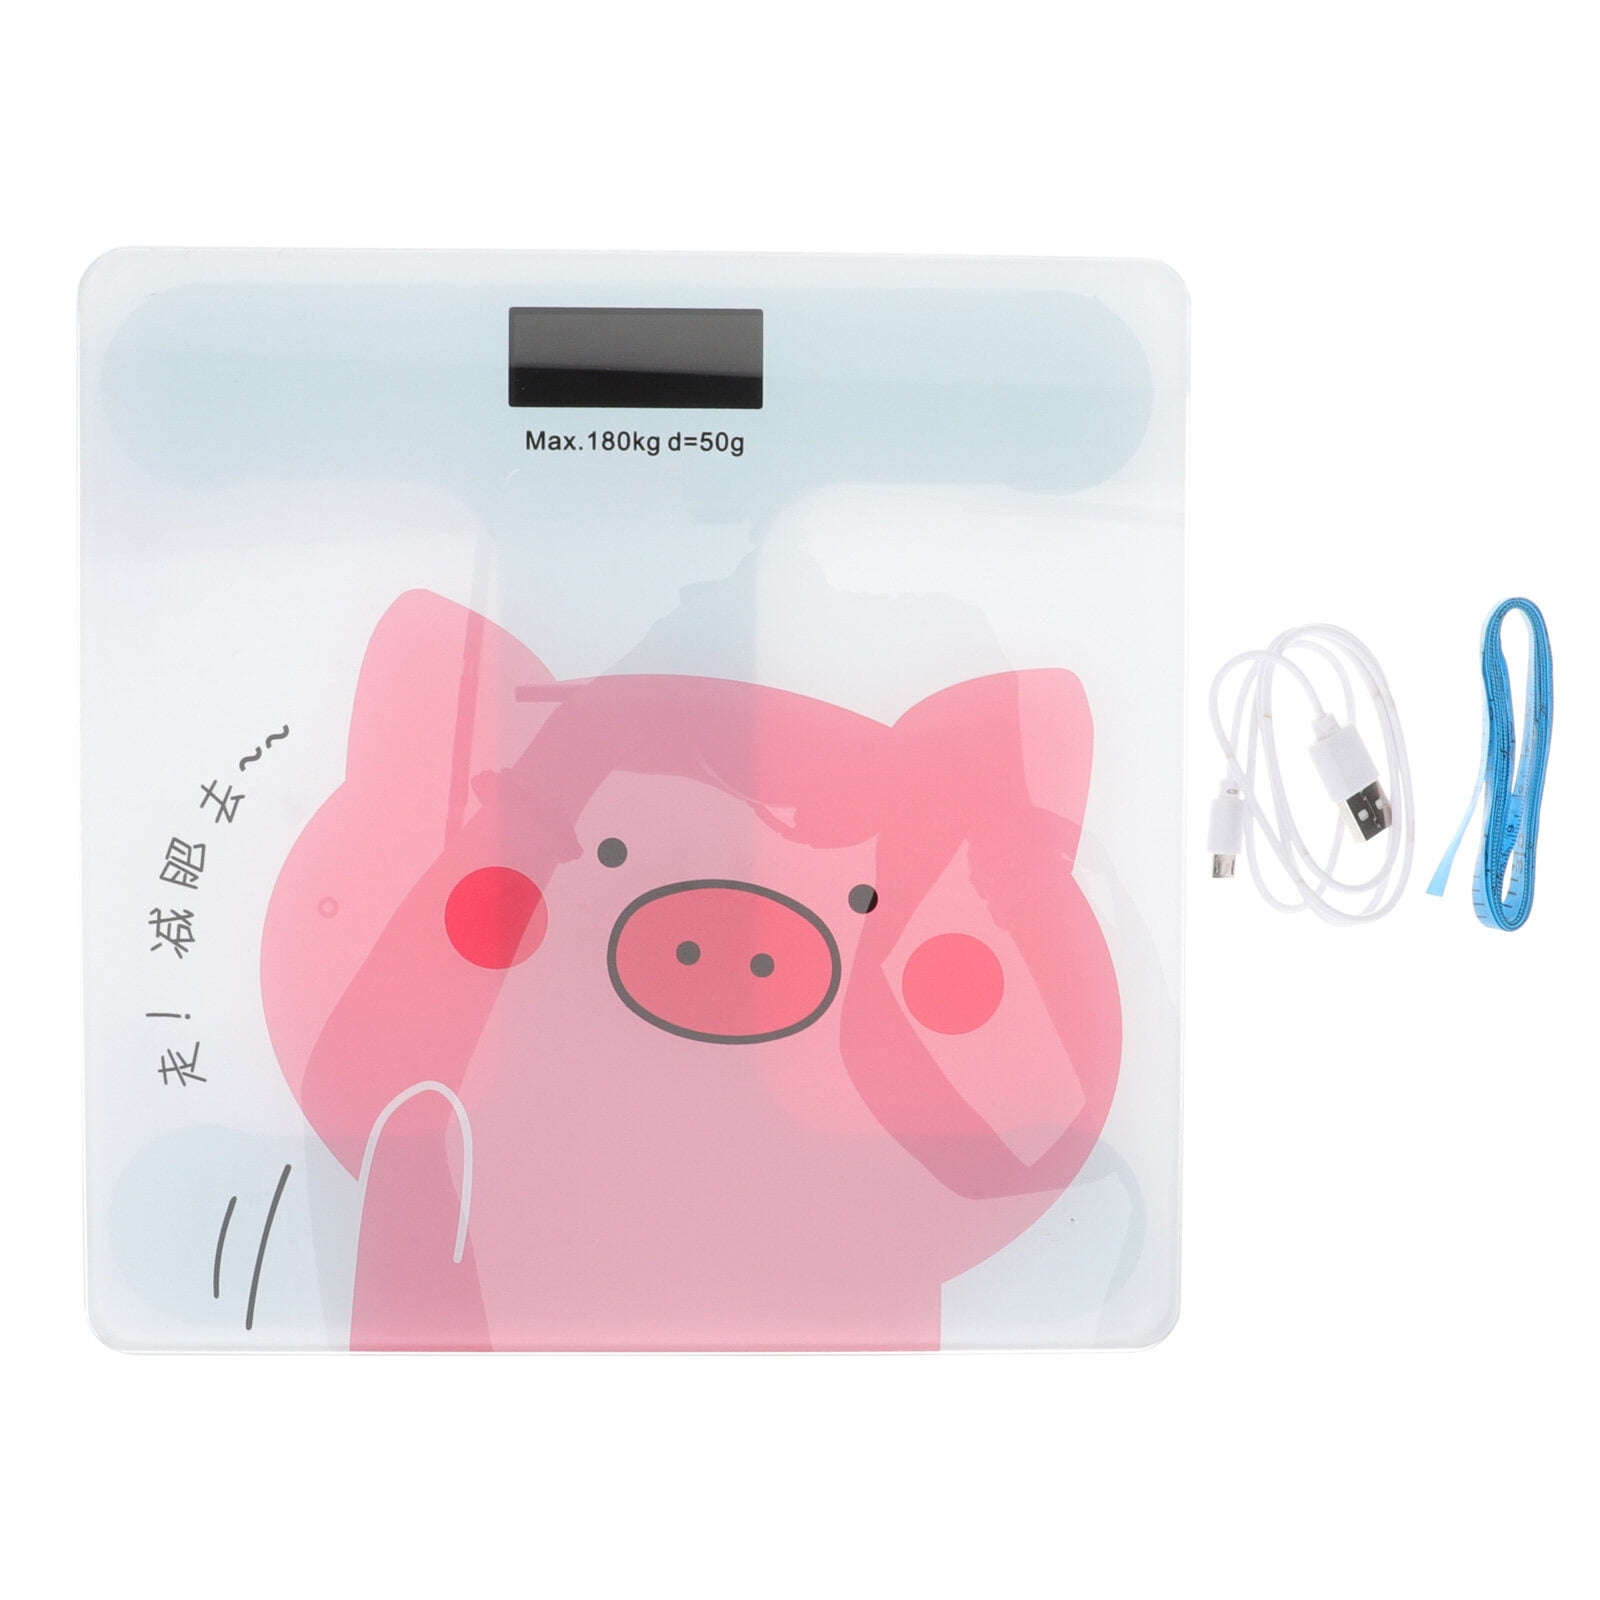 Scale Pesas Para Pesar Personas Body Home Accessory Cartoon Lovely Weight Household Digital Scale Tool, Size: 26x26cm